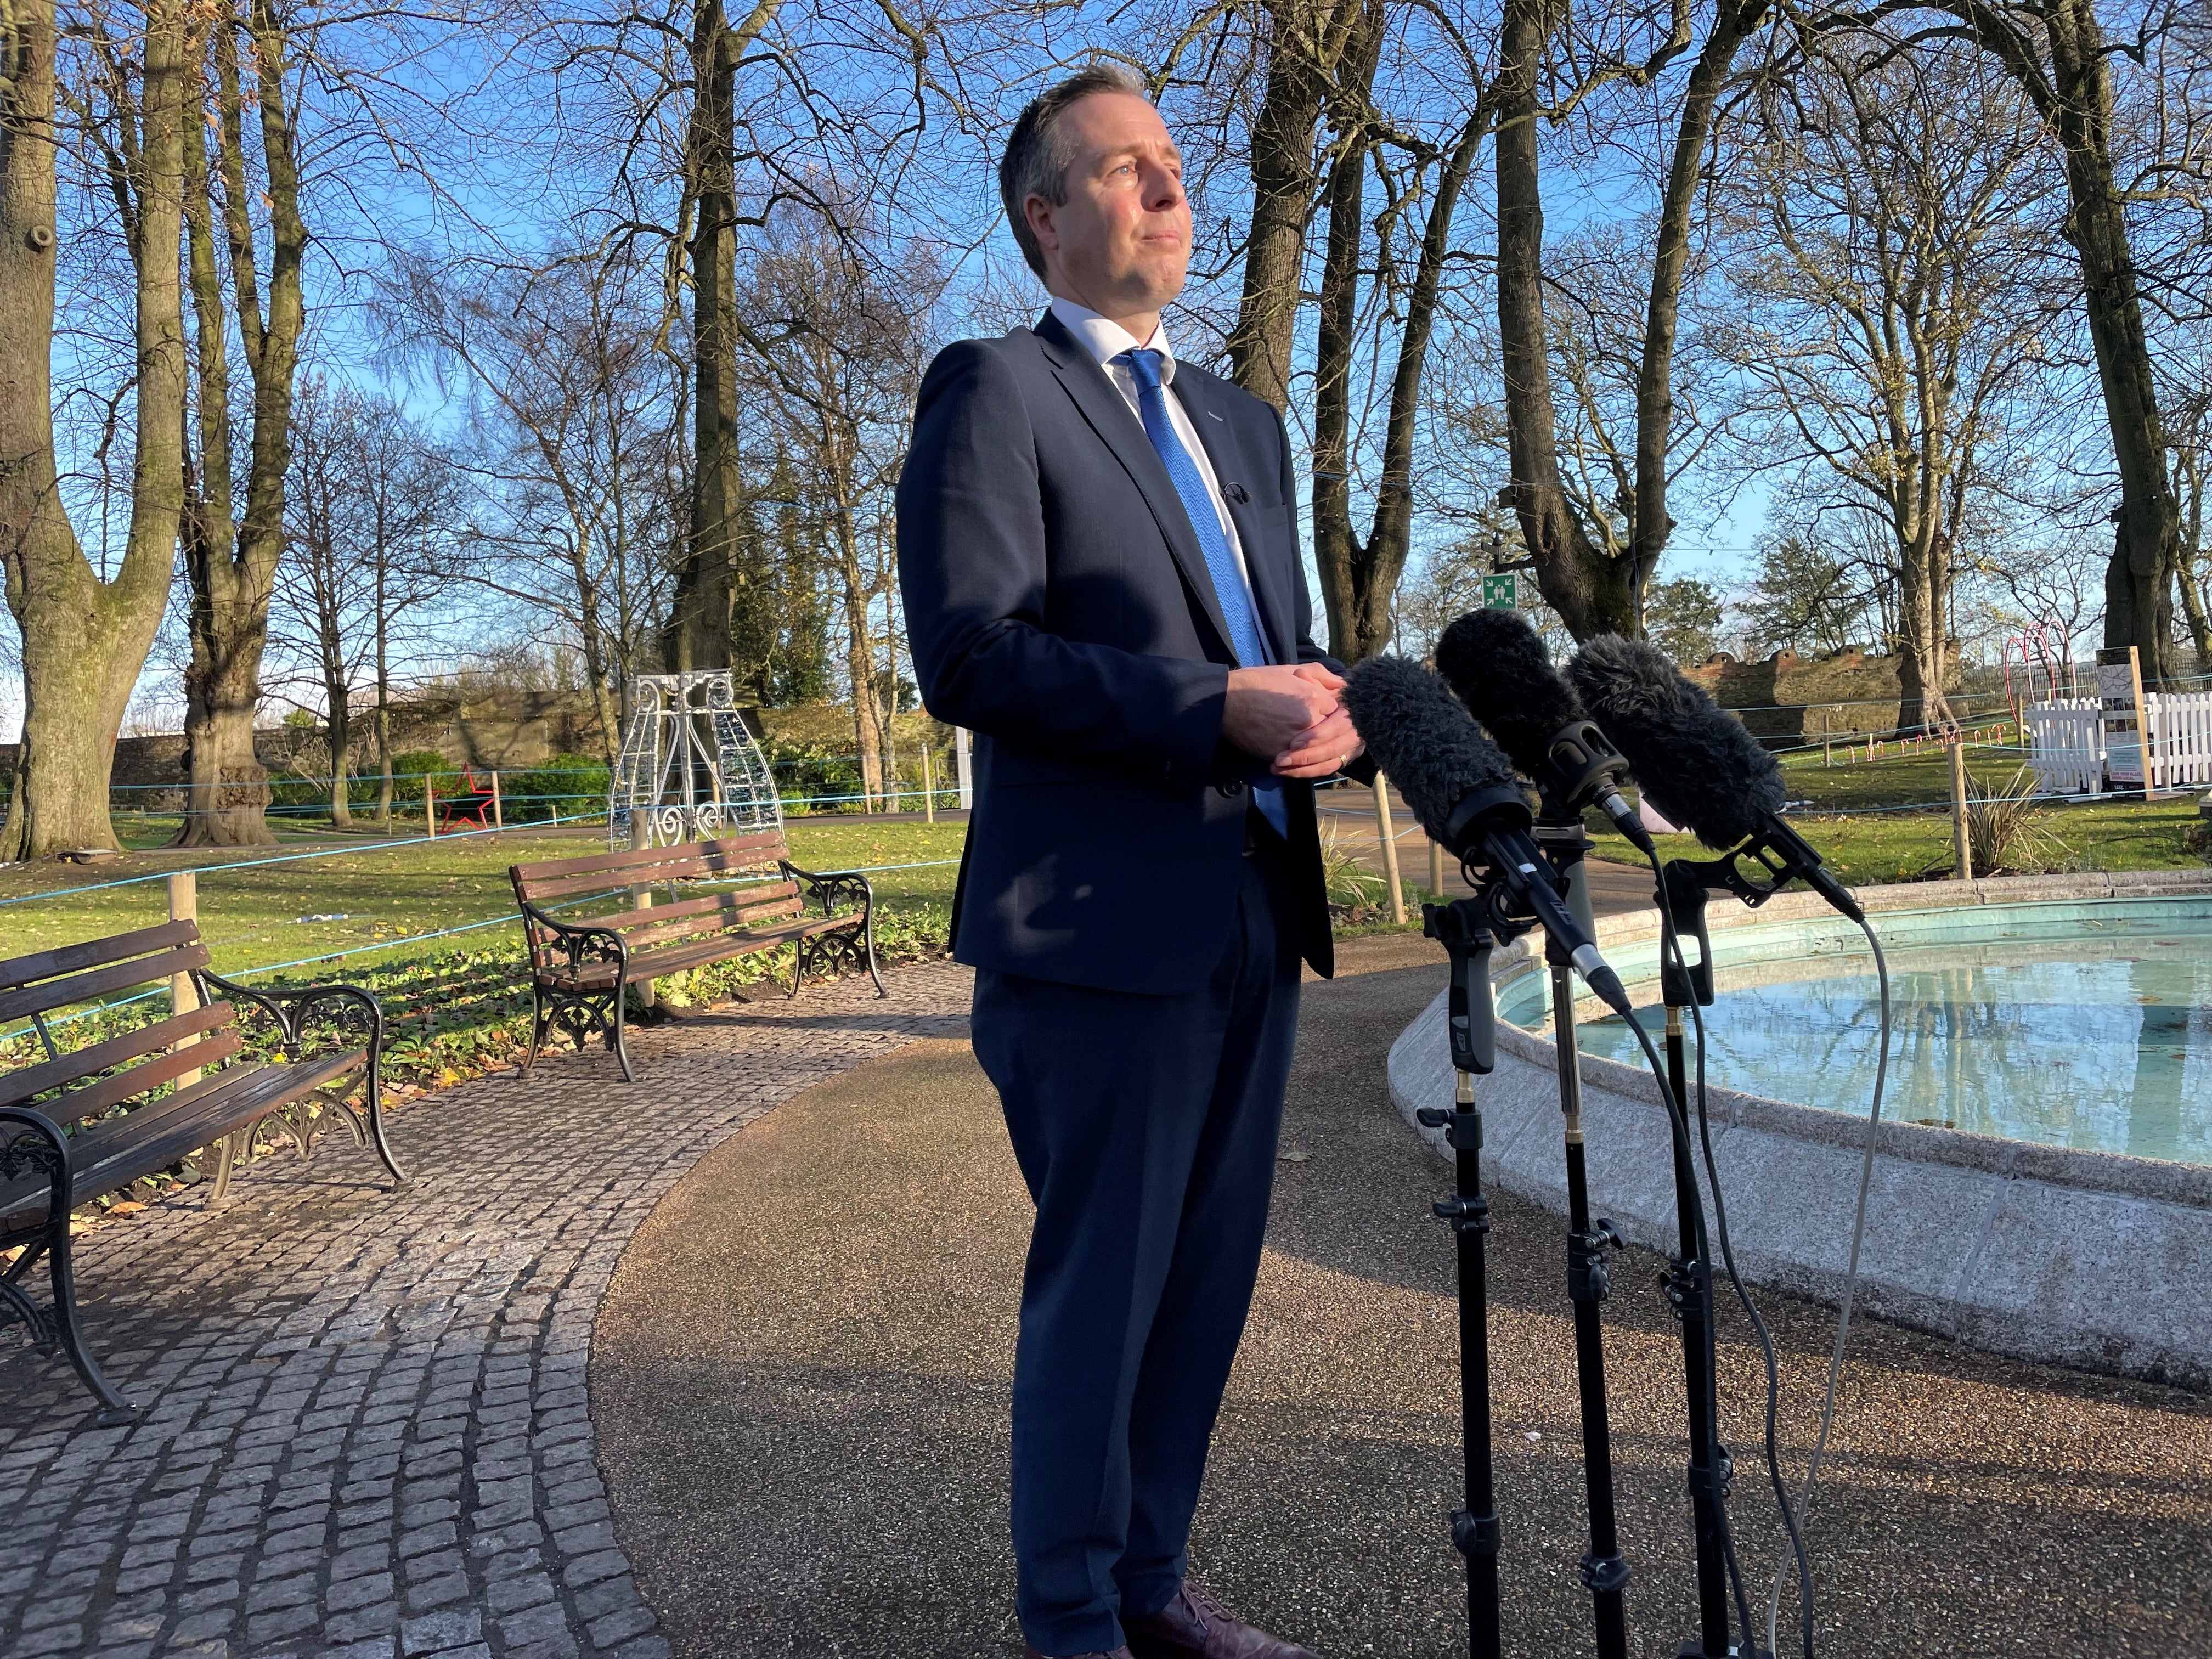 Northern Ireland’s First Minister, Paul Givan, has said there are no plans for further Covid restrictions over Christmas (Jonathan McCambridge/PA)